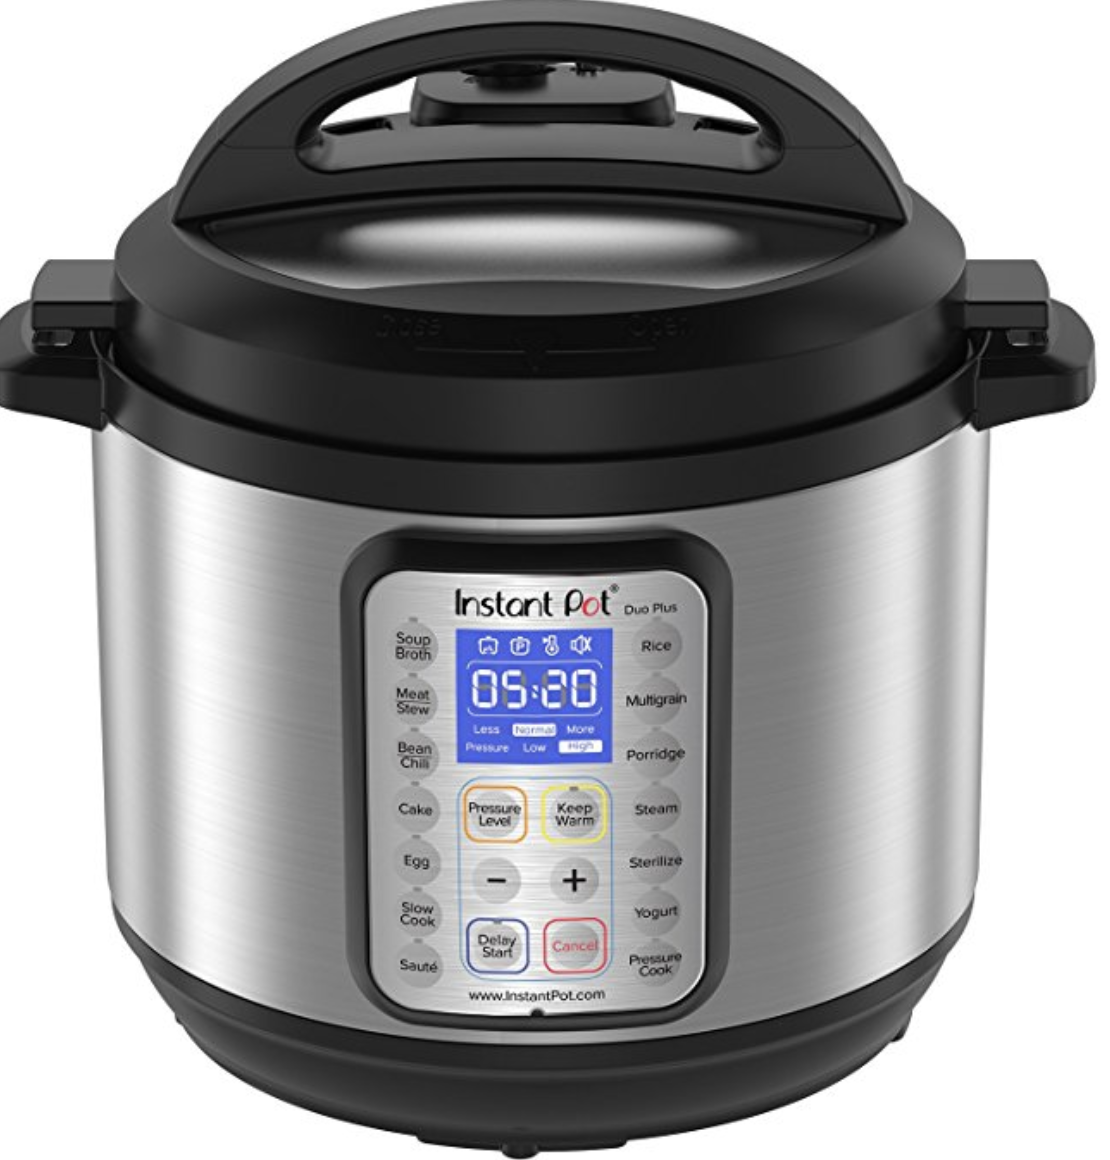 BETTER THAN BLACK FRIDAY! 8-Qt 9-in-1 Instant Pot Just $89.95